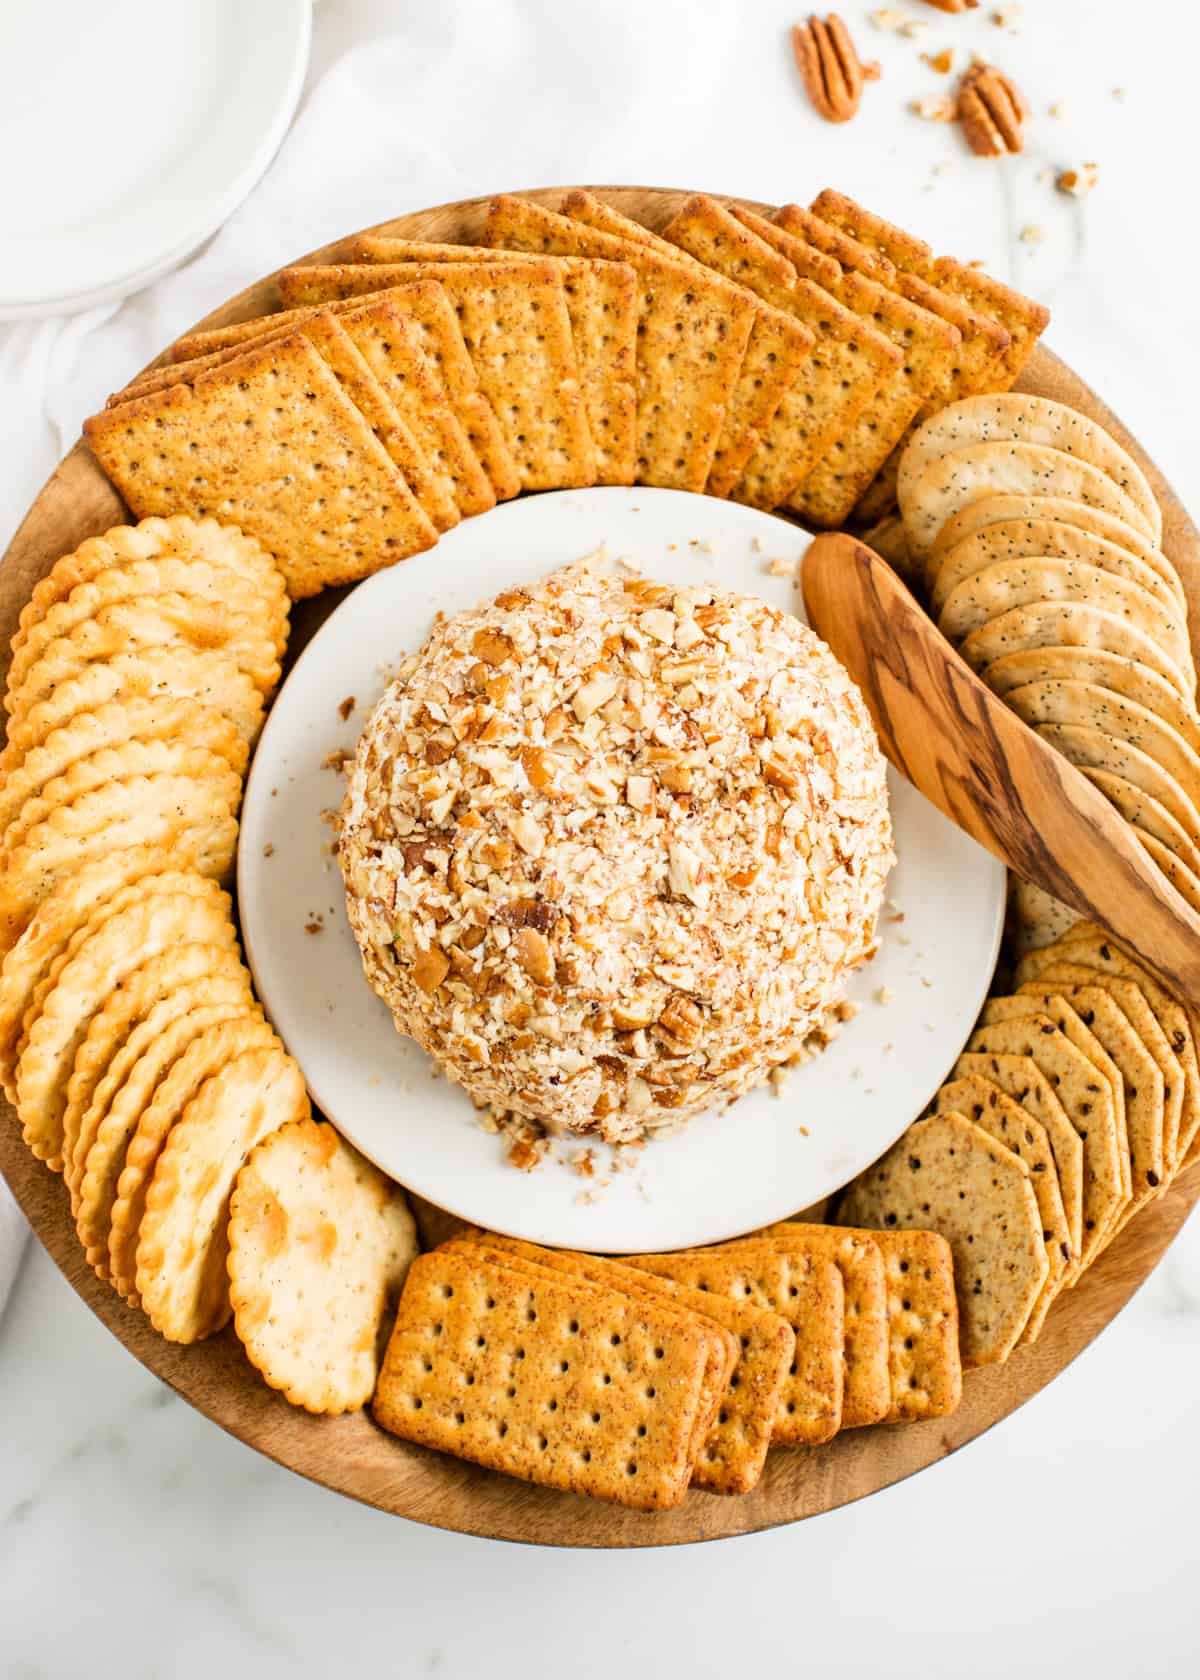 Cheese ball with crackers on a white plate.